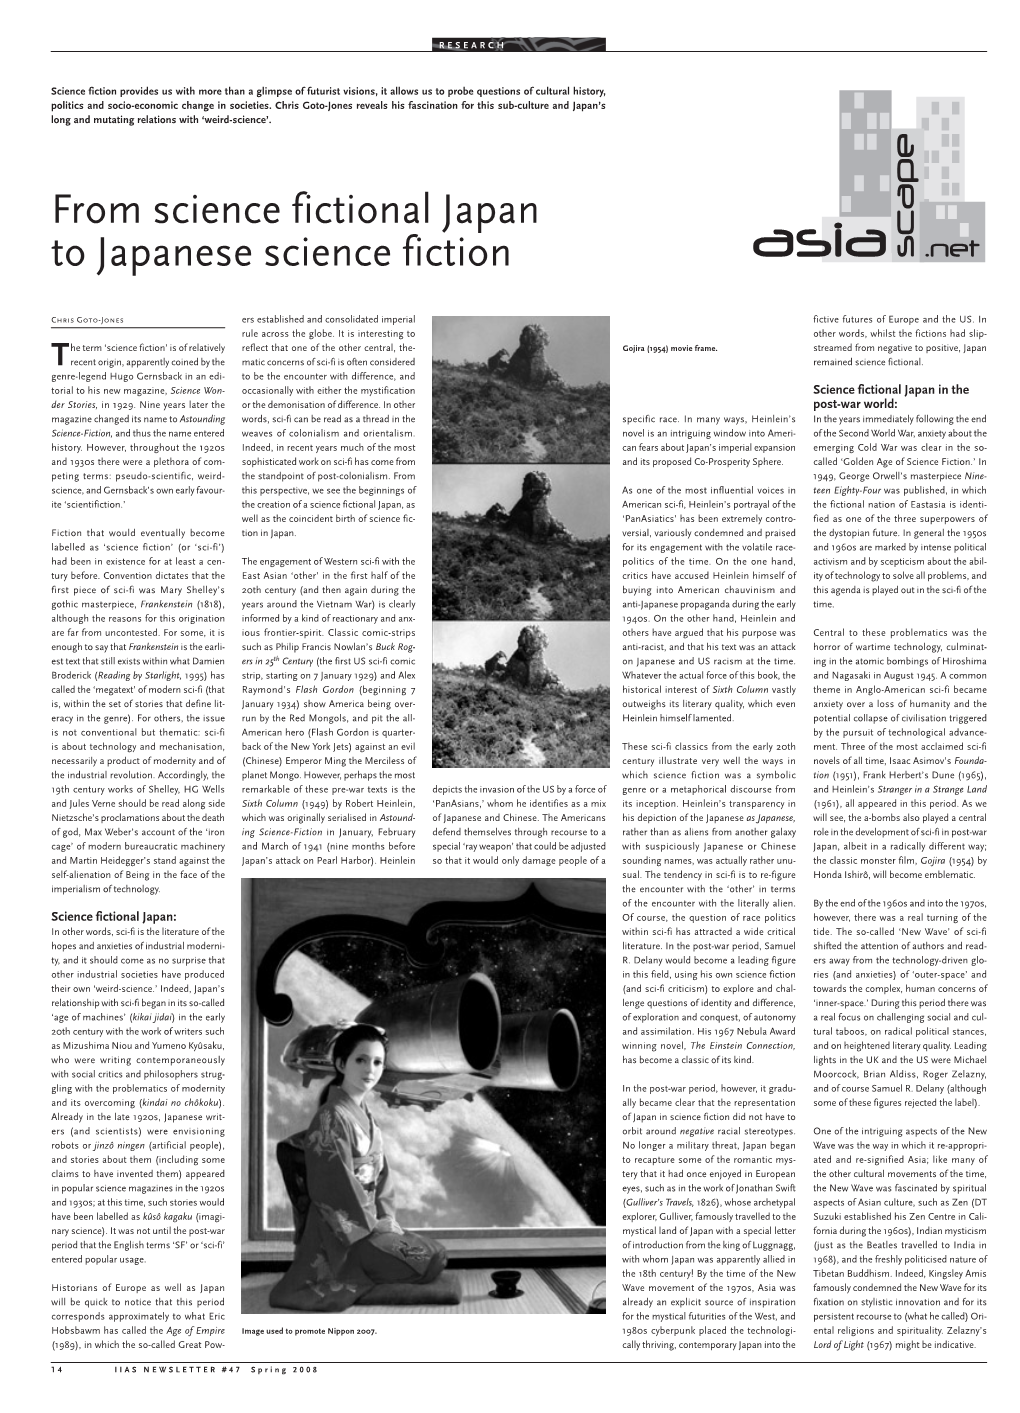 From Science Fictional Japan to Japanese Science Fiction